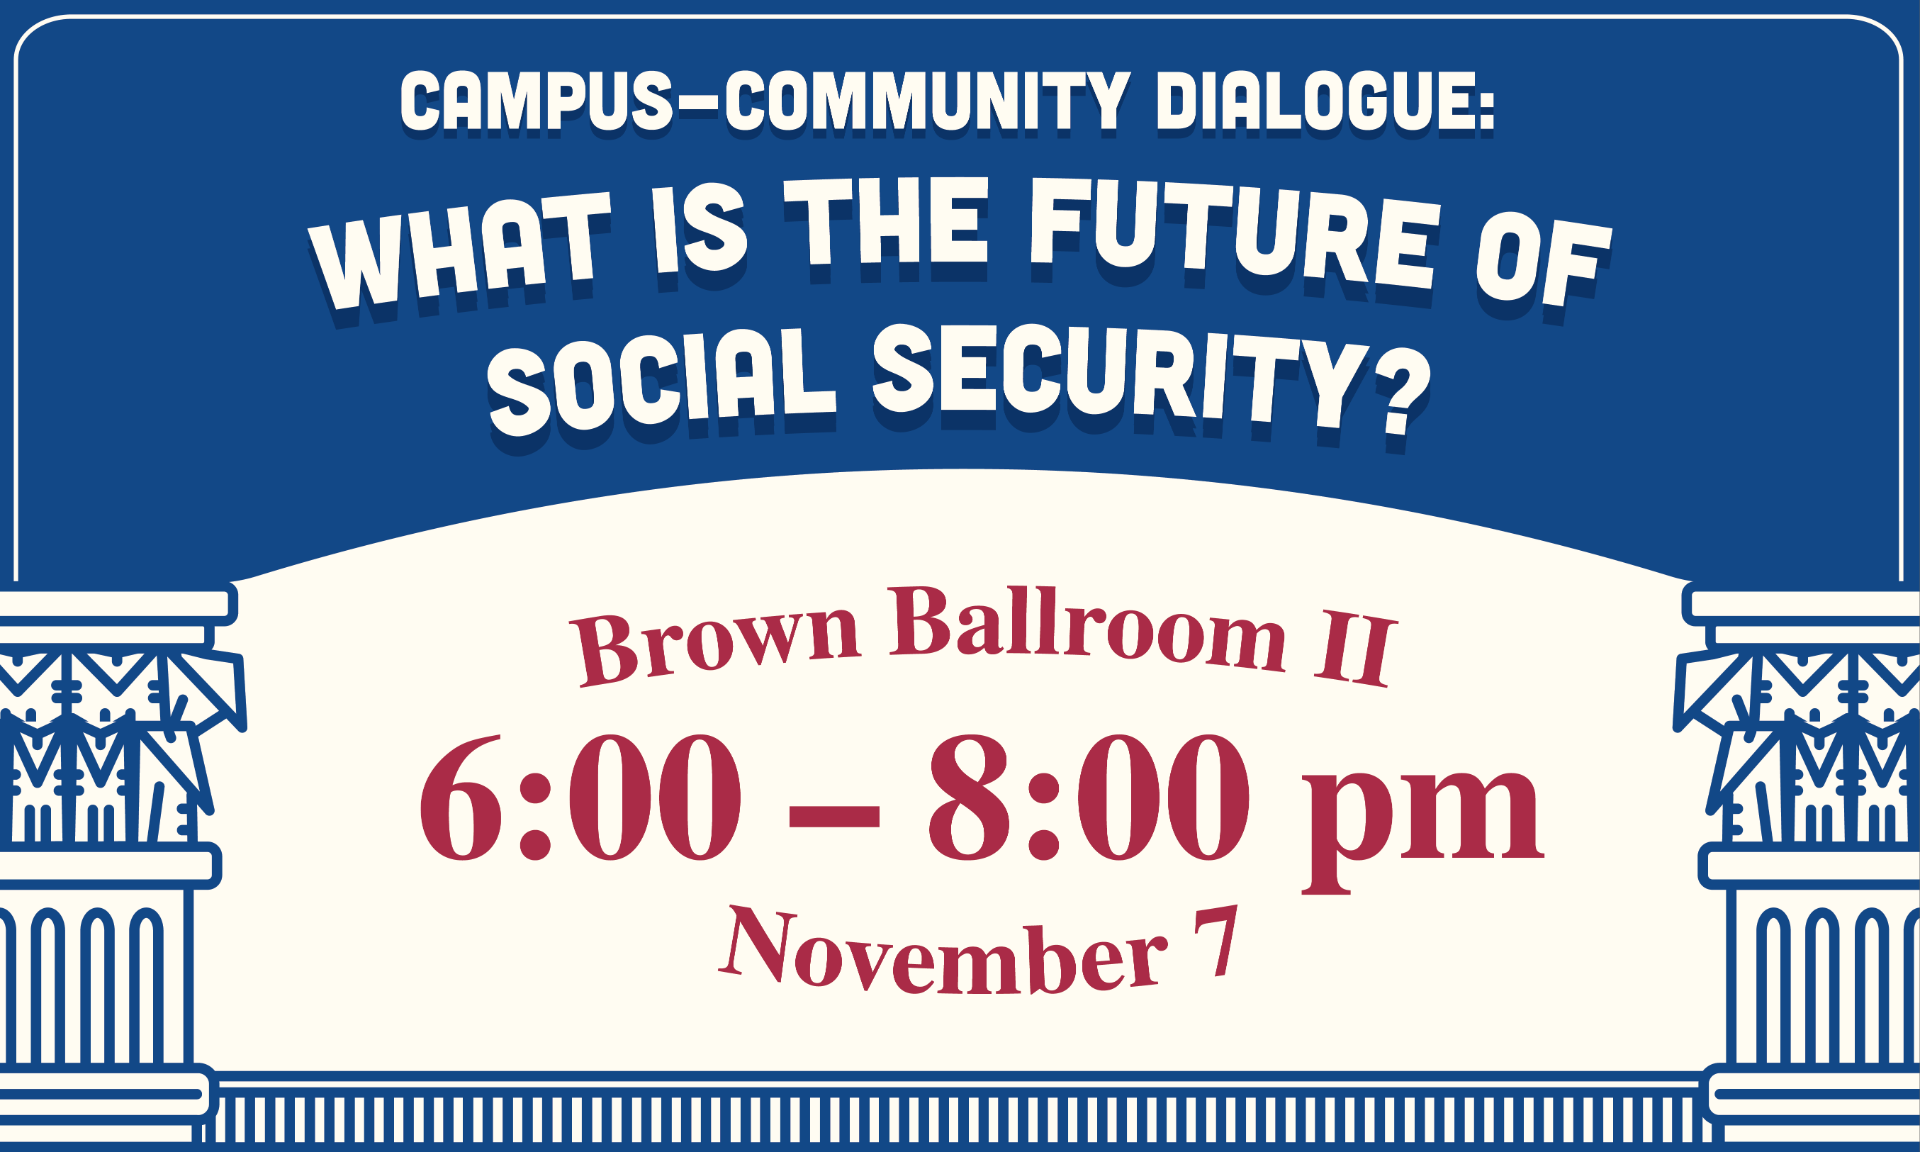 A banner advertises the Campus-Community Dialogue: What is the Future of Social Security? event.